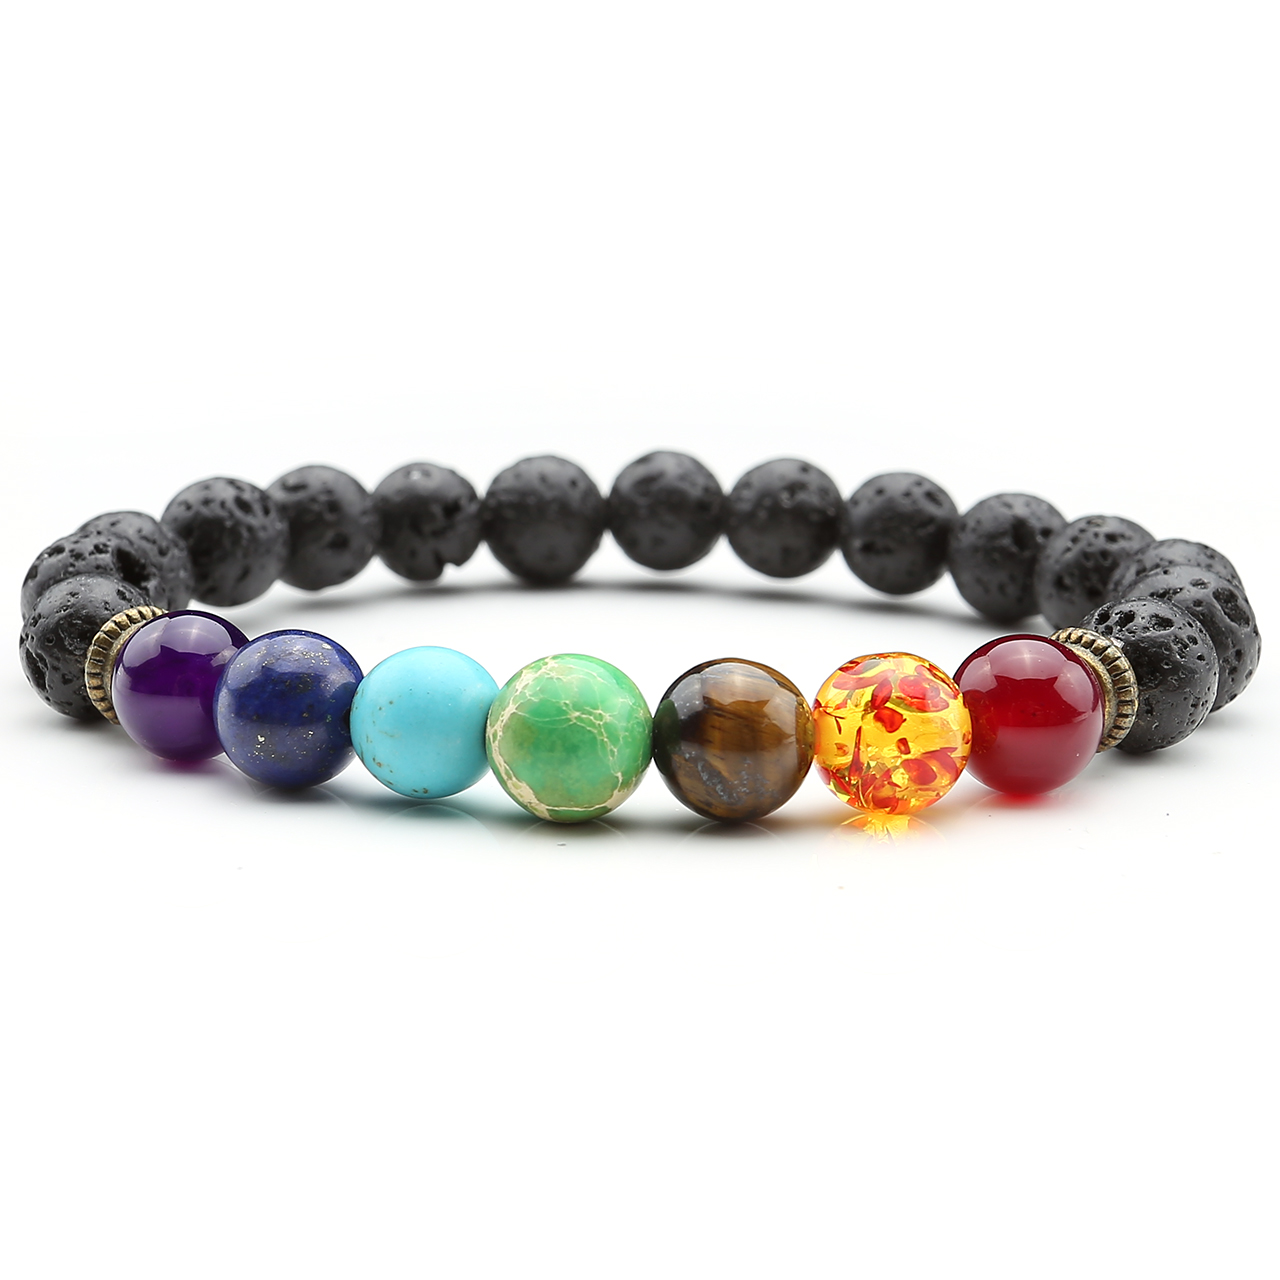 Top Plaza 7 Chakra Healing Bracelet with Real Stones, Lava Diffuser, Mala Meditation Mens Womens Religious Stretch Bracelets - Protection, Energy, Healing, Aromatherapy